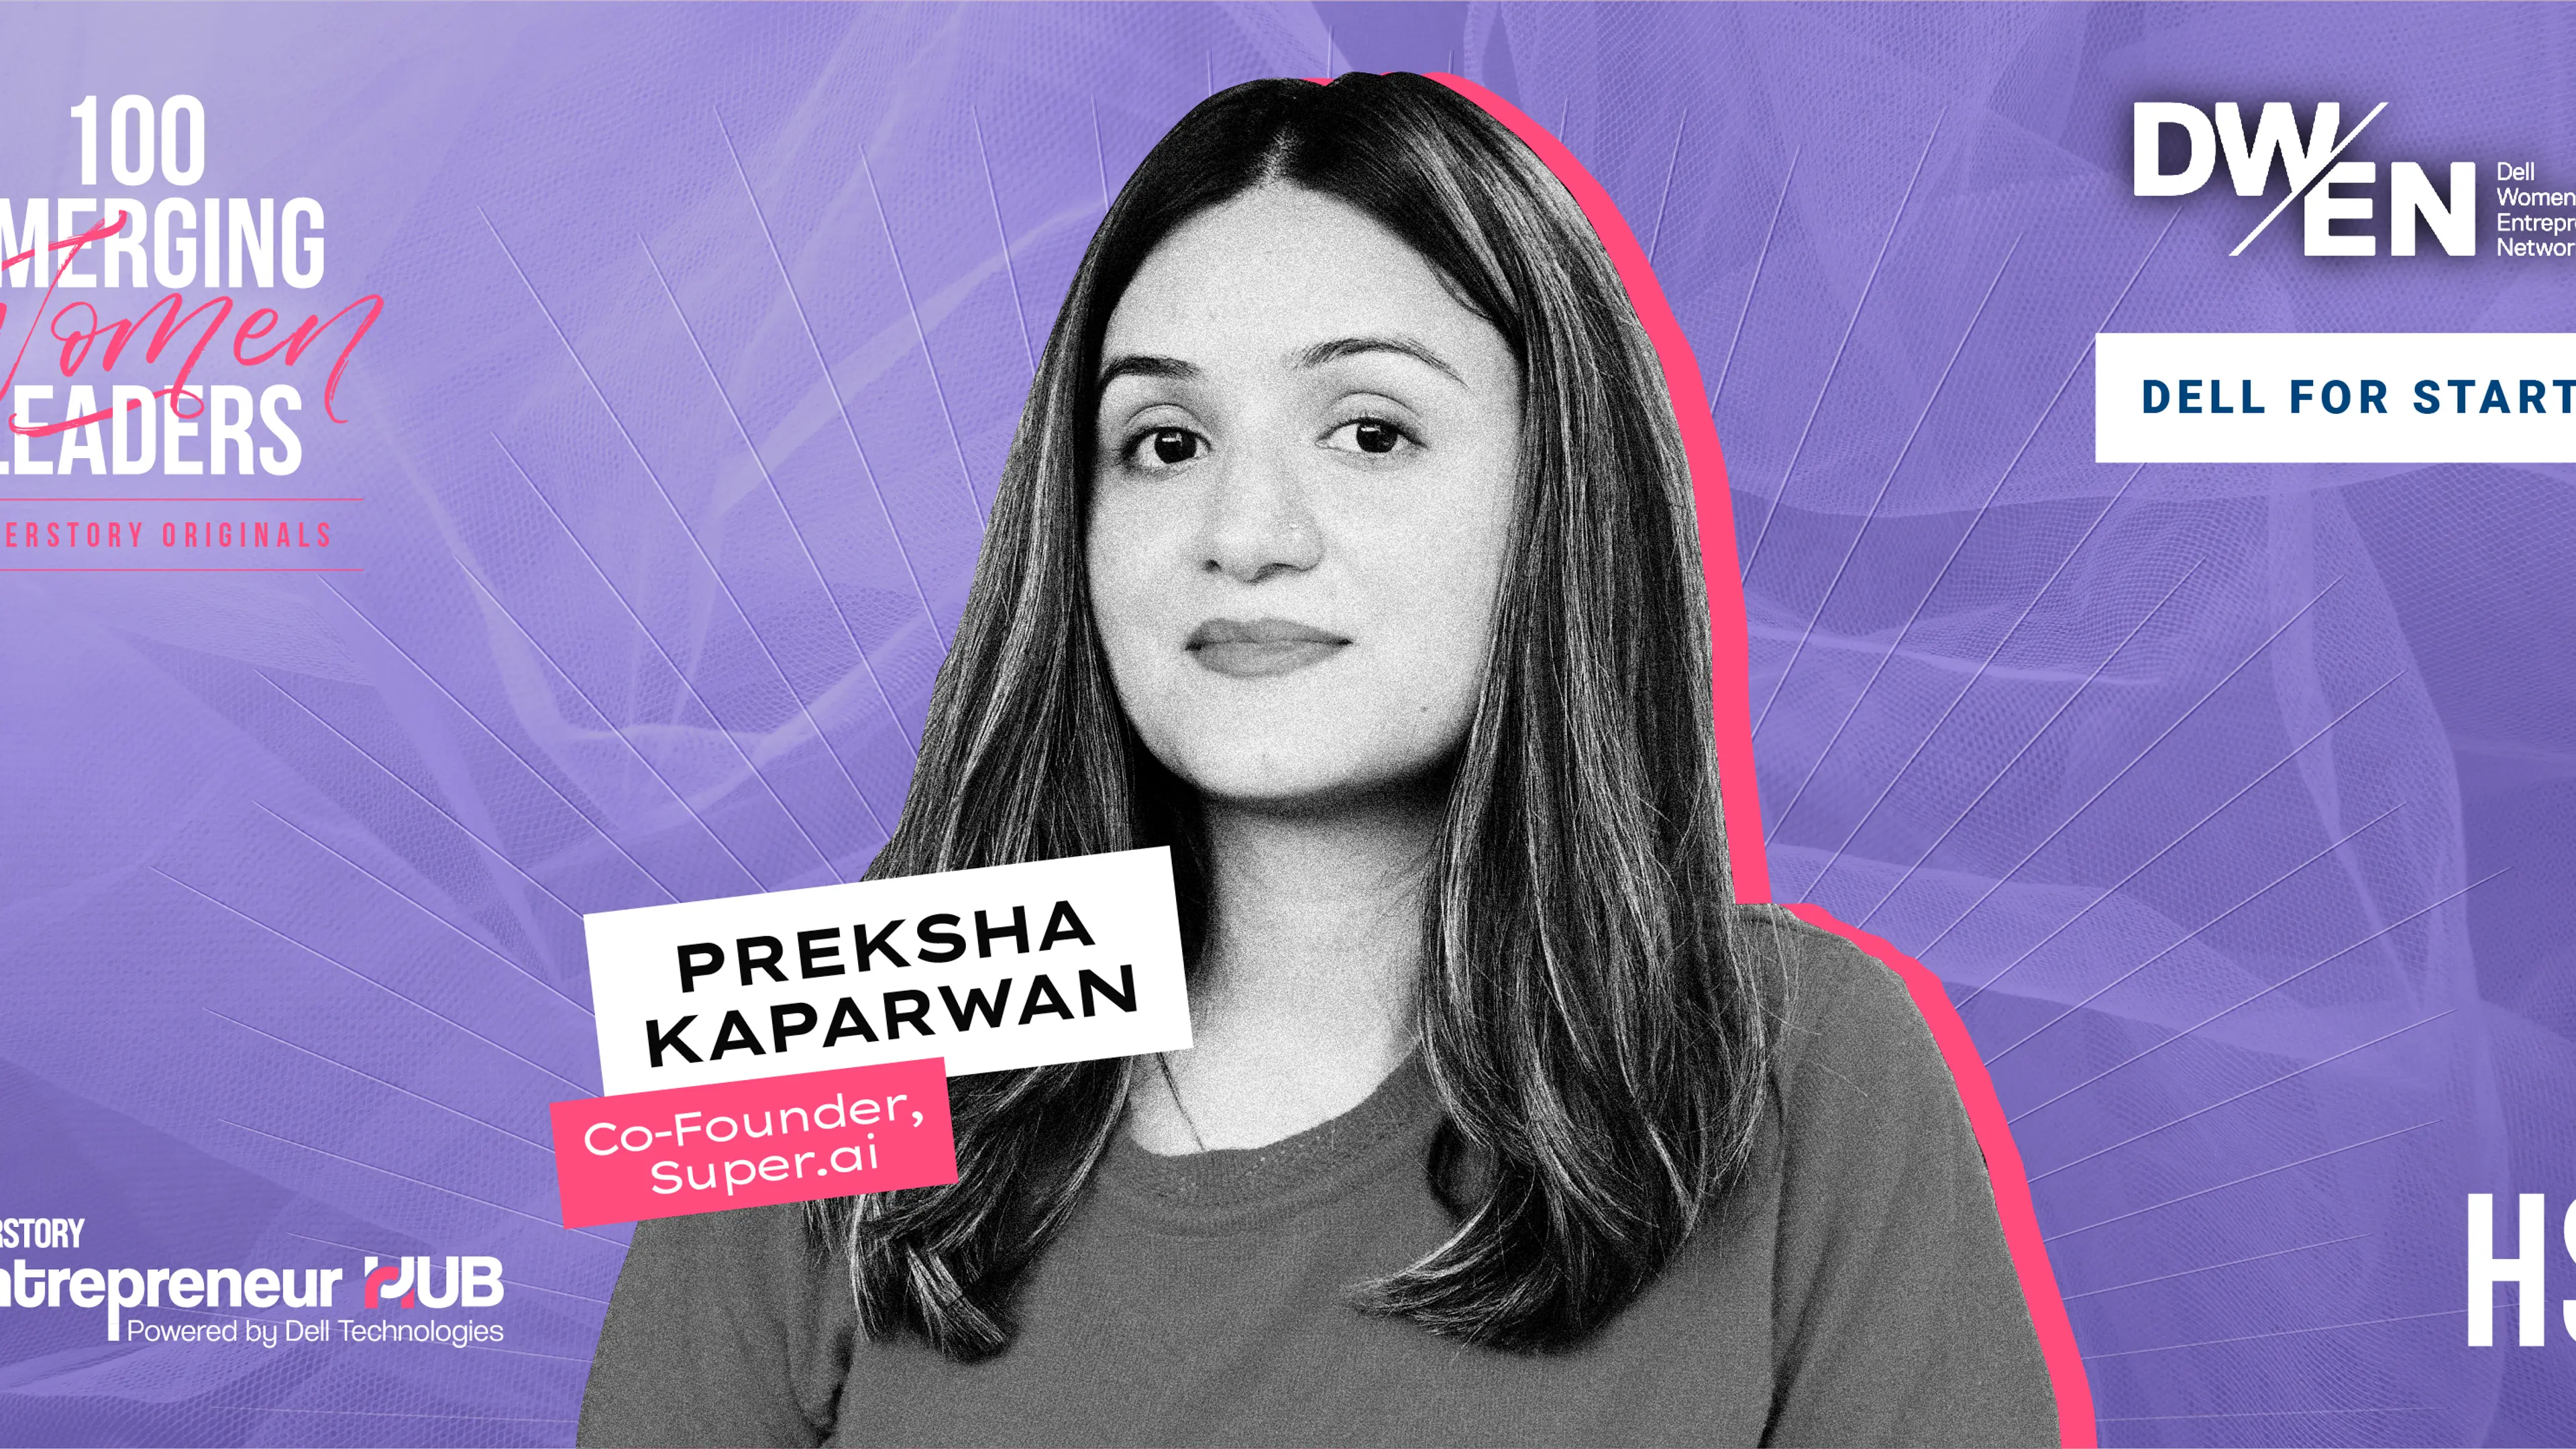 [100 Emerging Women Leaders] From hospitality to building LLM, how Preksha Kaparwan realised her passion for tech 